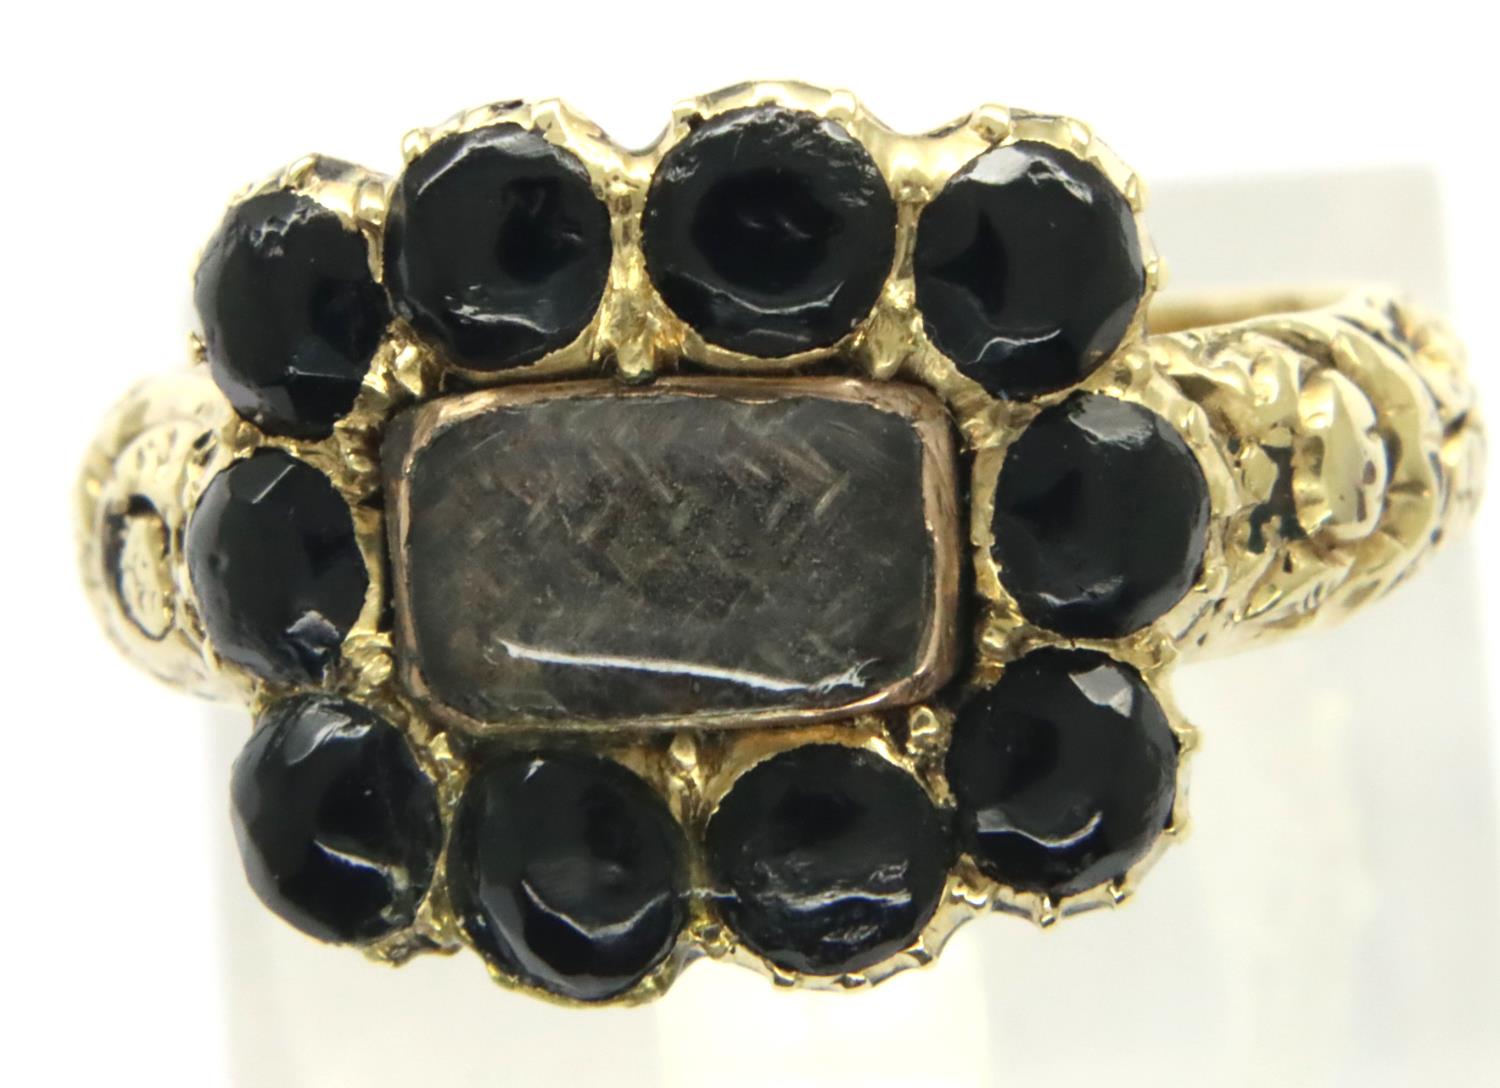 1819 Georgian 18ct gold and onyx mourning ring, size M/N, 3.7g. P&P Group 1 (£14+VAT for the first